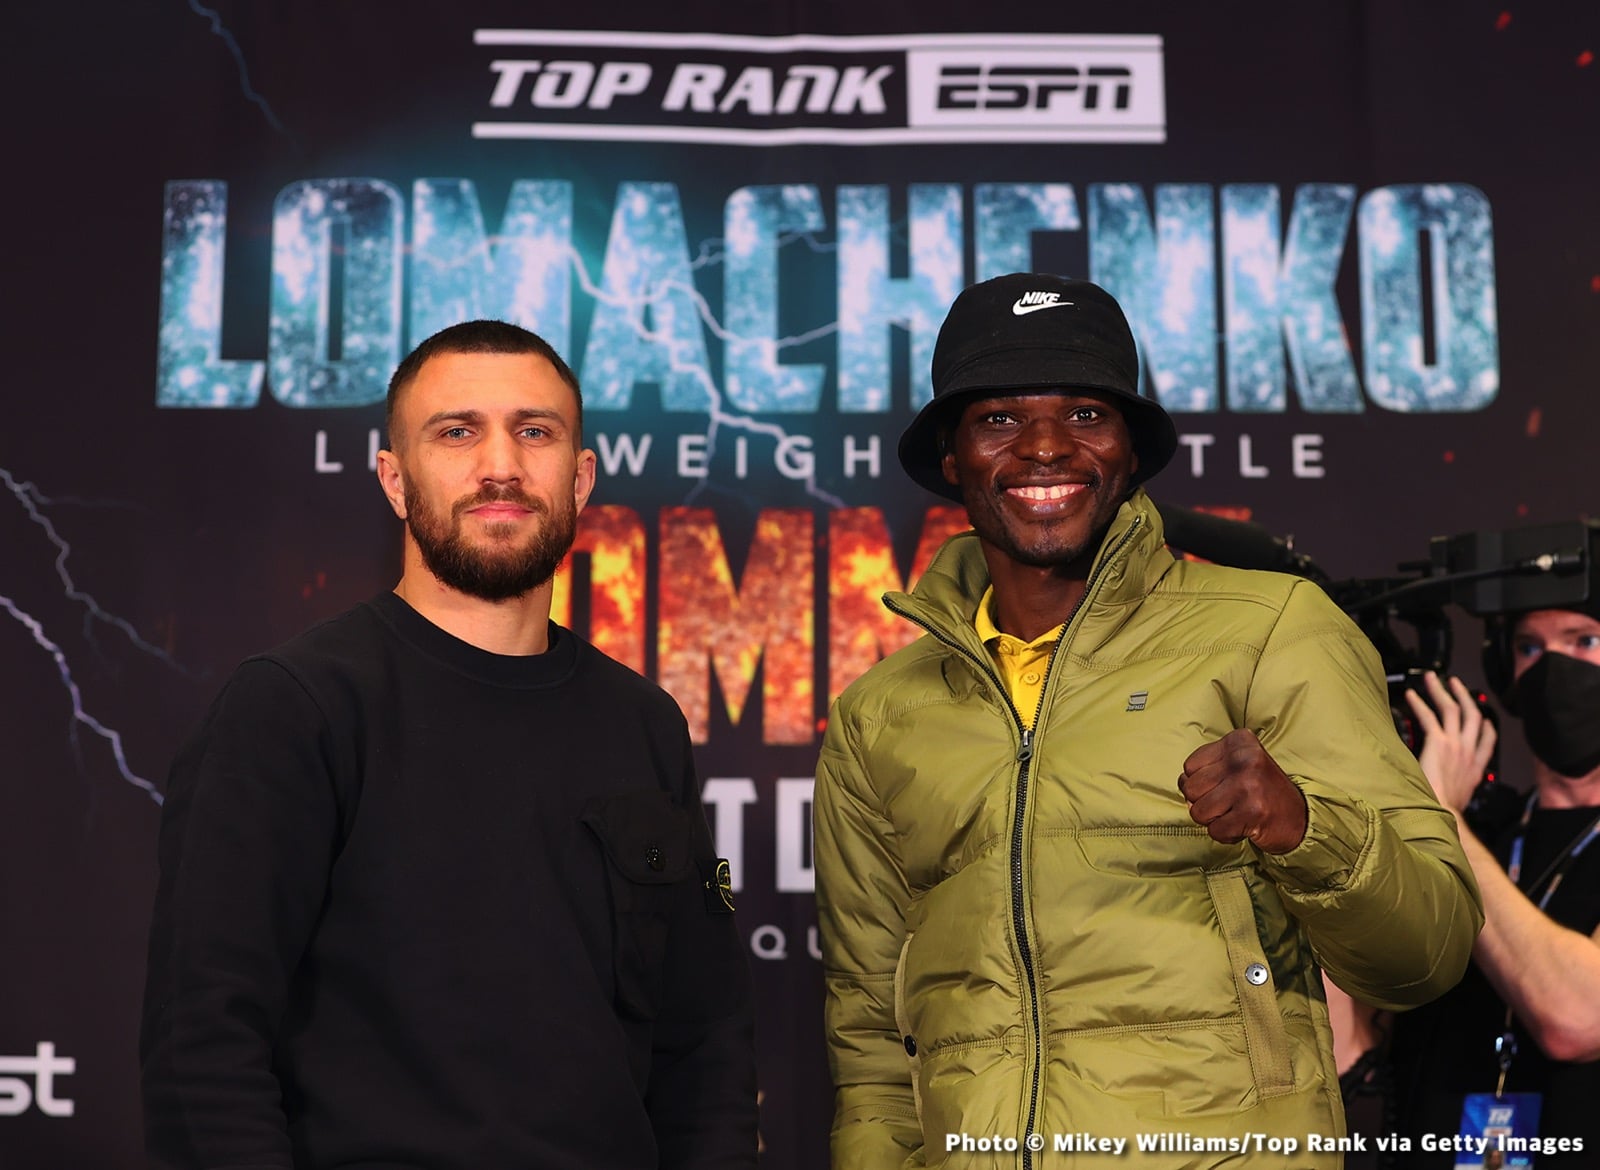 Lomachenko - Commey Official ESPN Weigh In Results